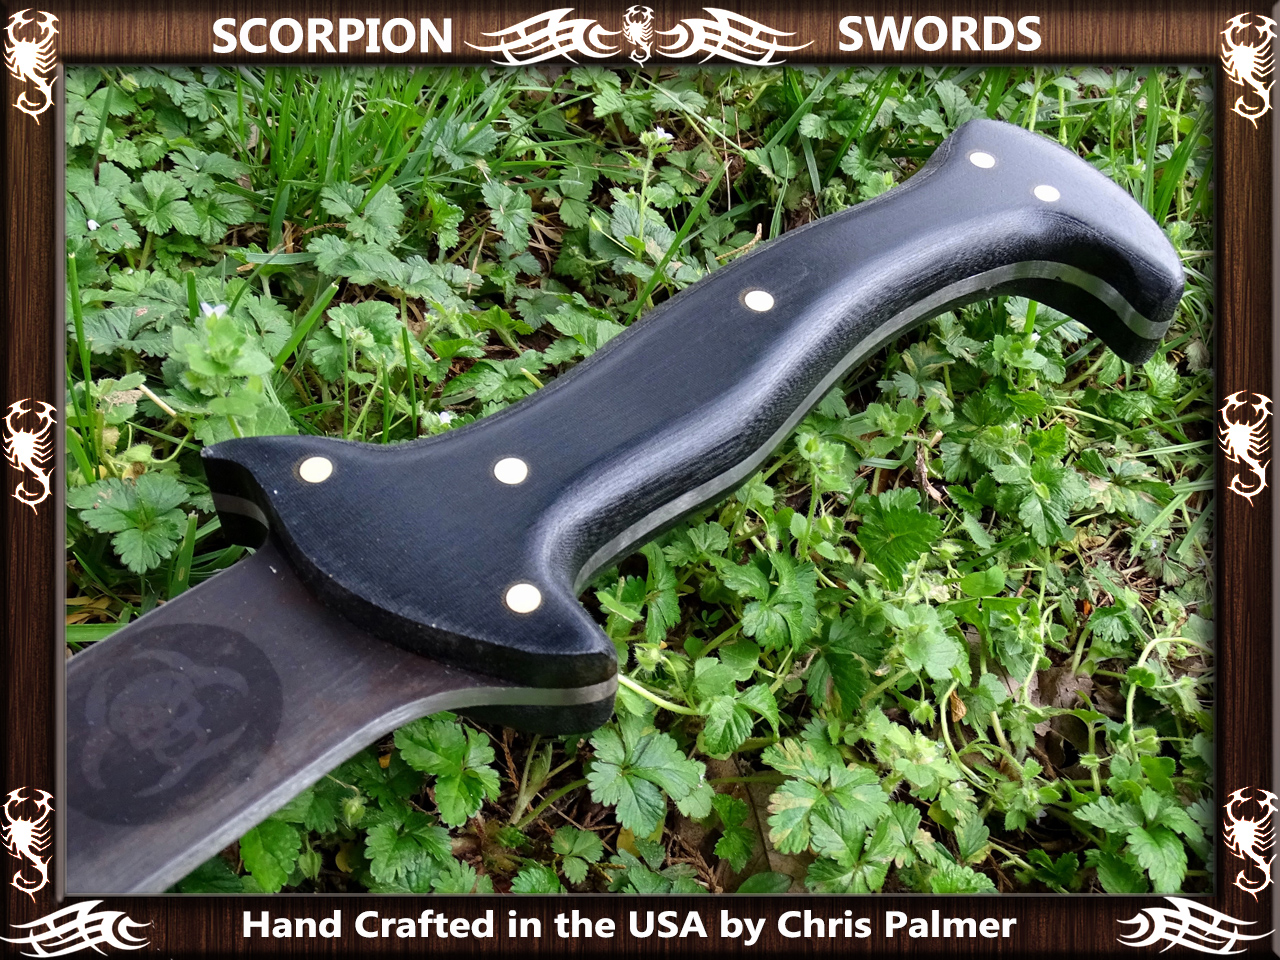 Our Jack's Knife Influenced - Scorpion Swords & Knives